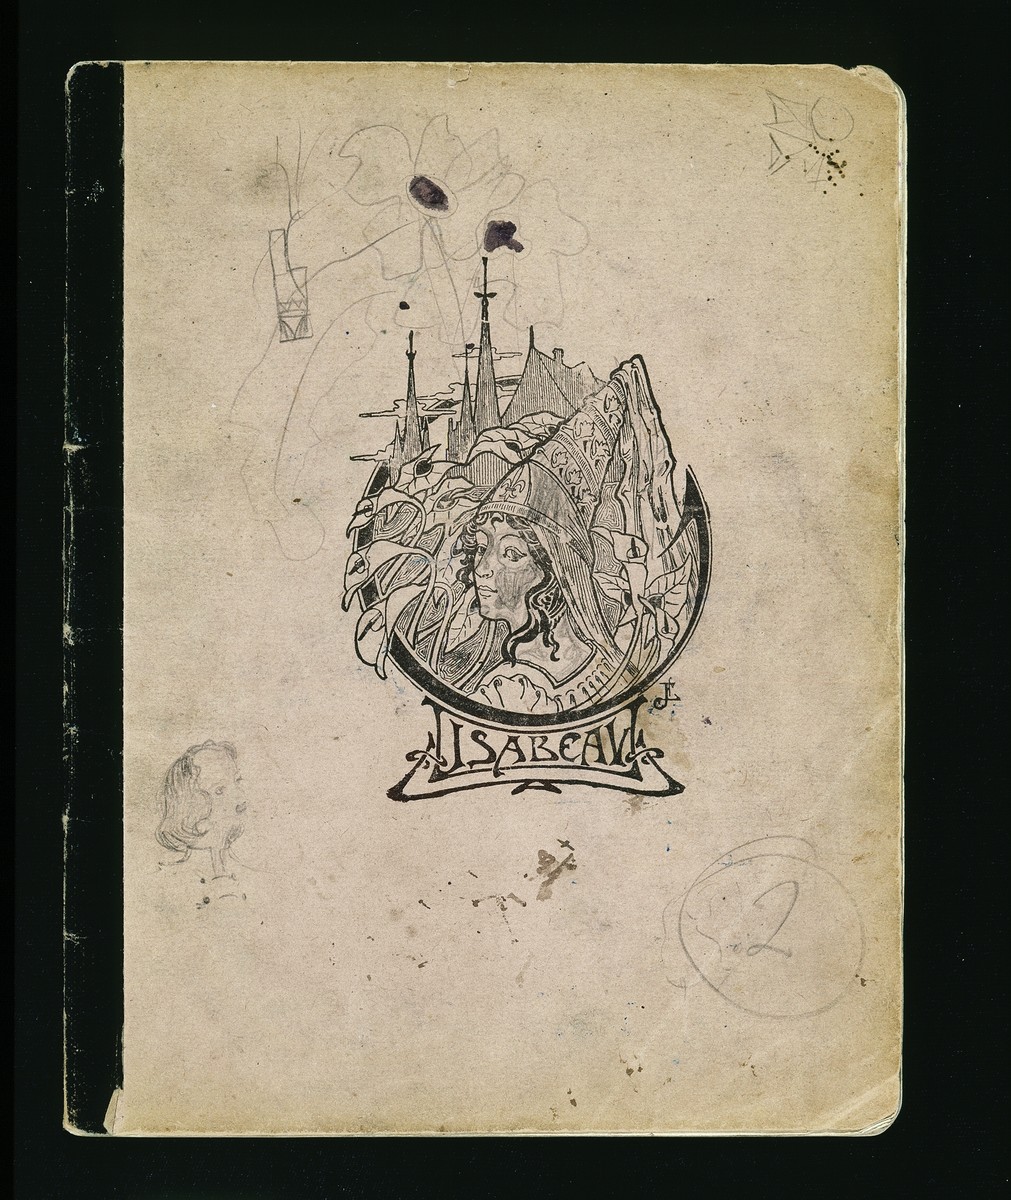 The cover of a diary written by Elizabeth Kaufmann while living with the family of Pastor André Trocmé in Le Chambon-sur-Lignon.  

The cover of the diary has an image of a maiden and a castle on it with the name "Isabeau" written below.